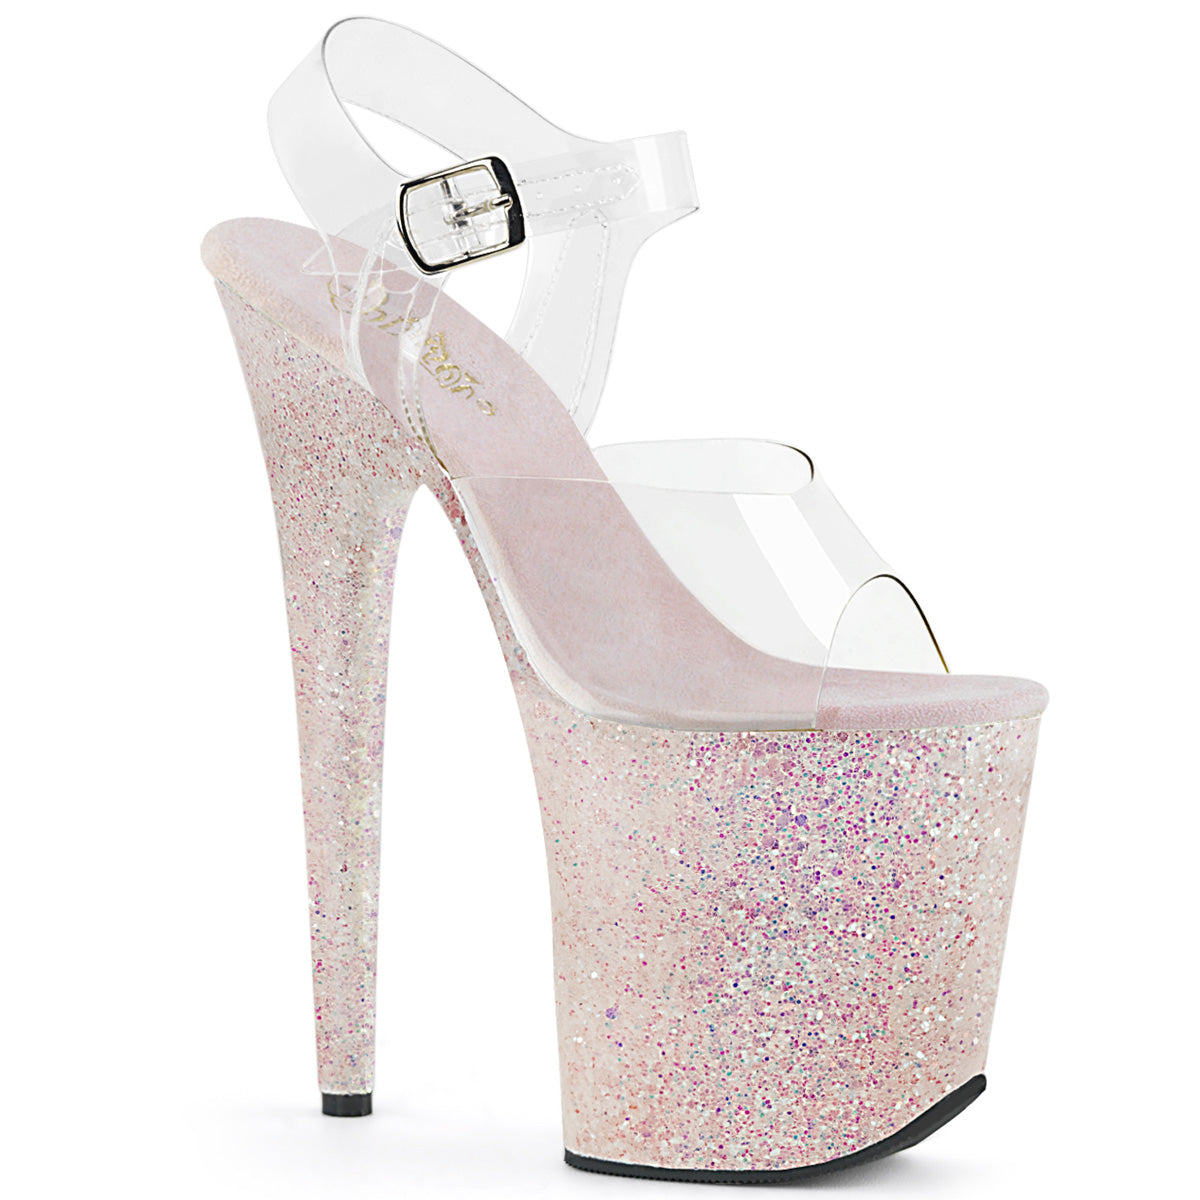 FLAMINGO-808LG Pleasers 8" Heel Clear Opal Glitter Sexy Shoes